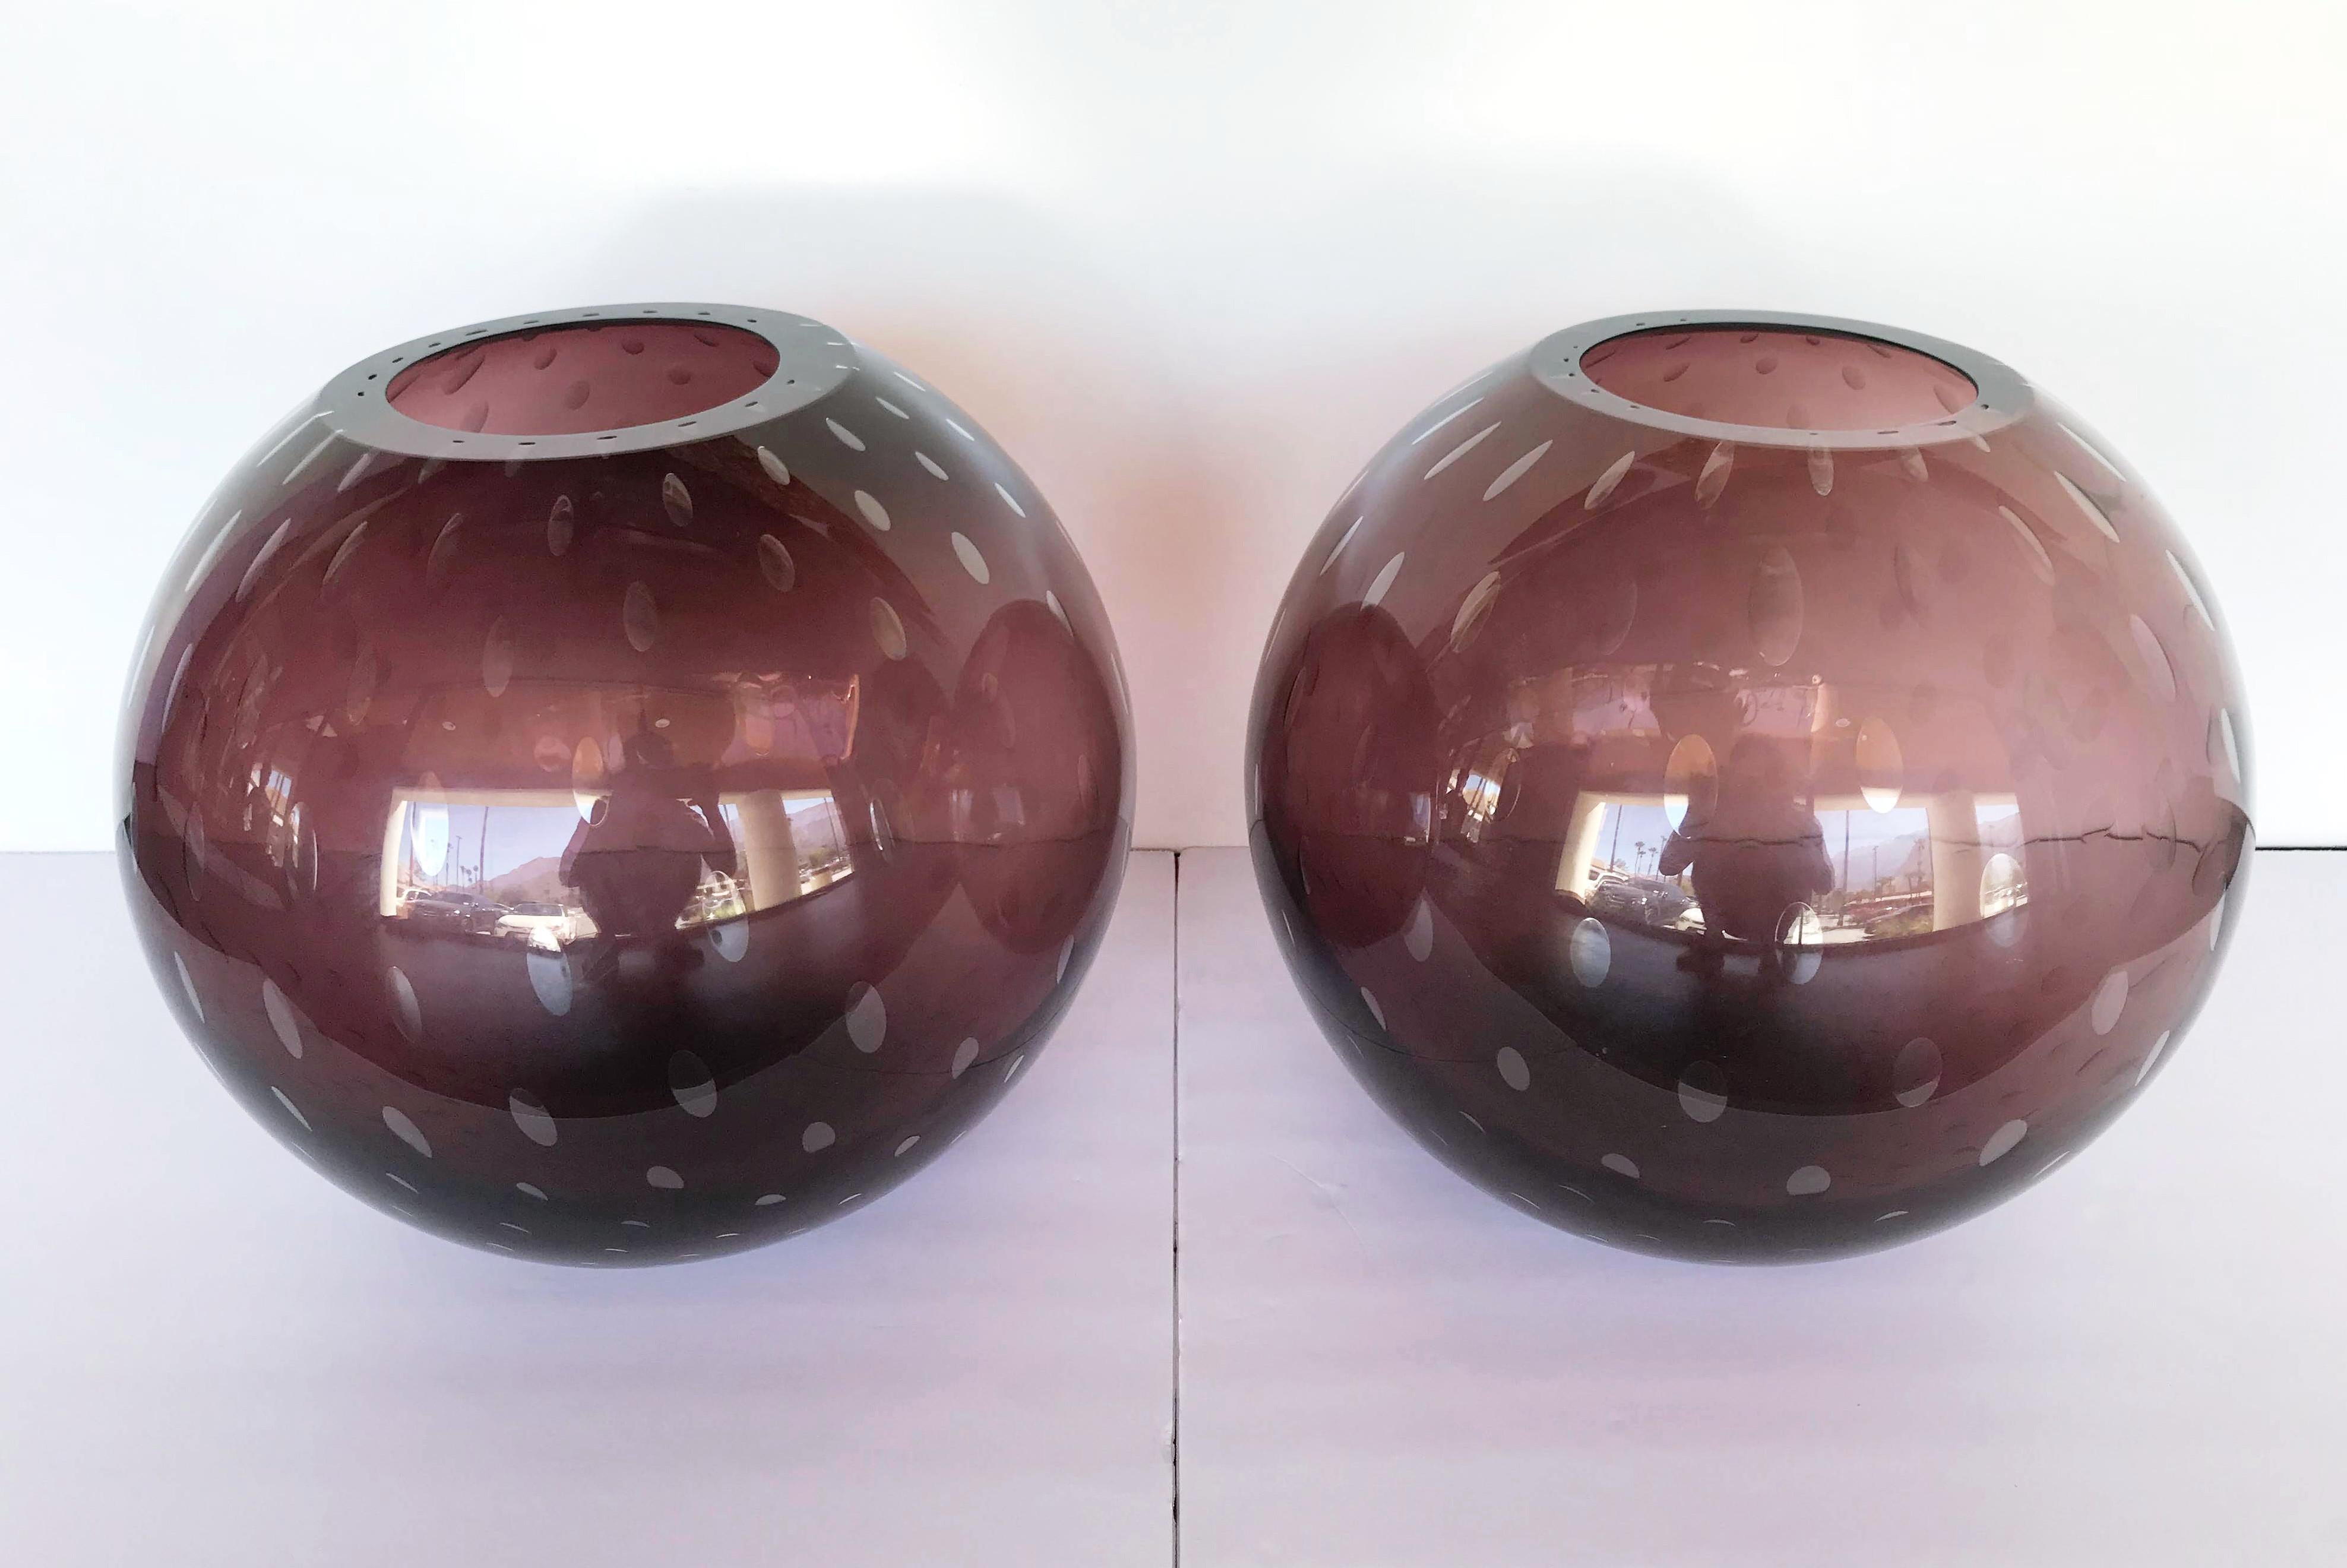 Italian vases or sculptures in thick amethyst purple Murano glass blown with bubbles inside the glass in Pulegoso technique by Alberto Dona for Fabio Ltd
Signature engraved on the base / Made in Italy 
Diameter: 13 inches / Height: 12 inches
2 in